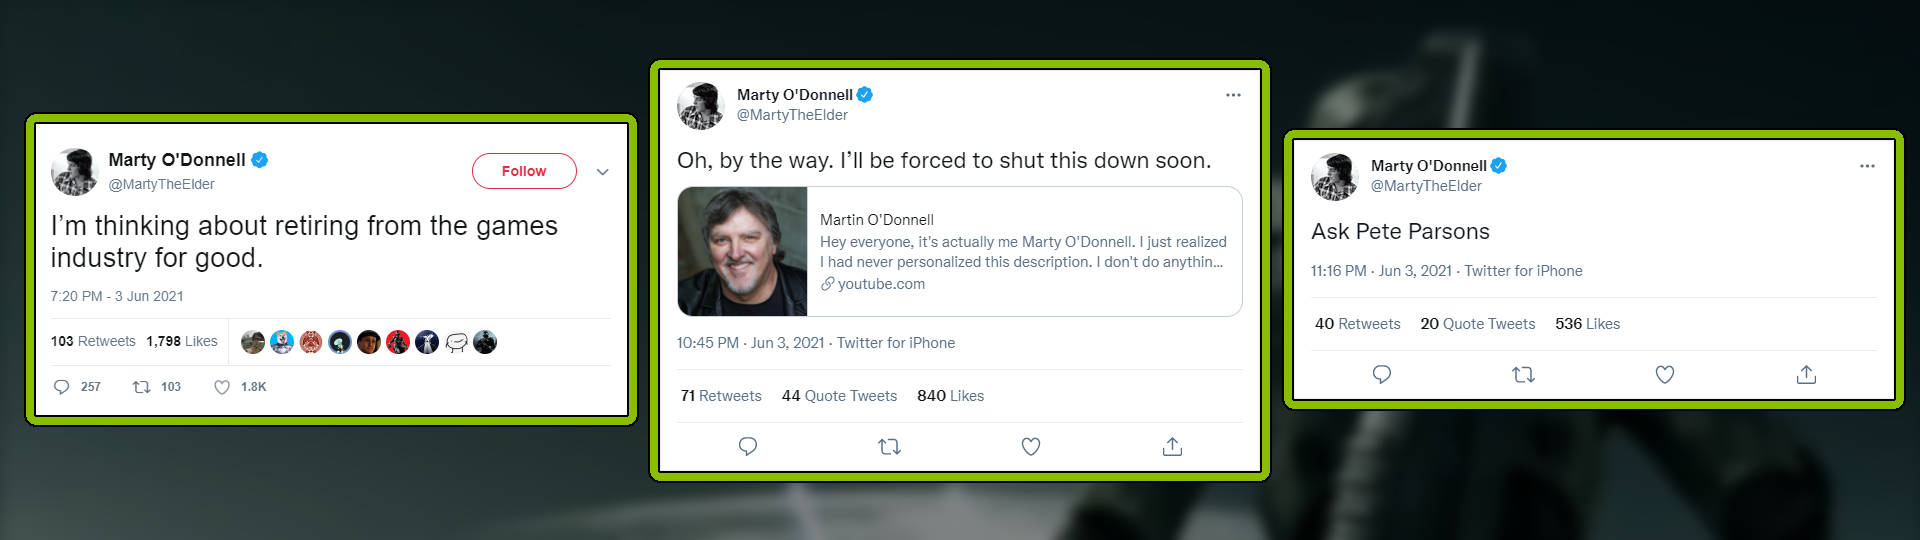 Marty O'Donnell deleted tweets slice